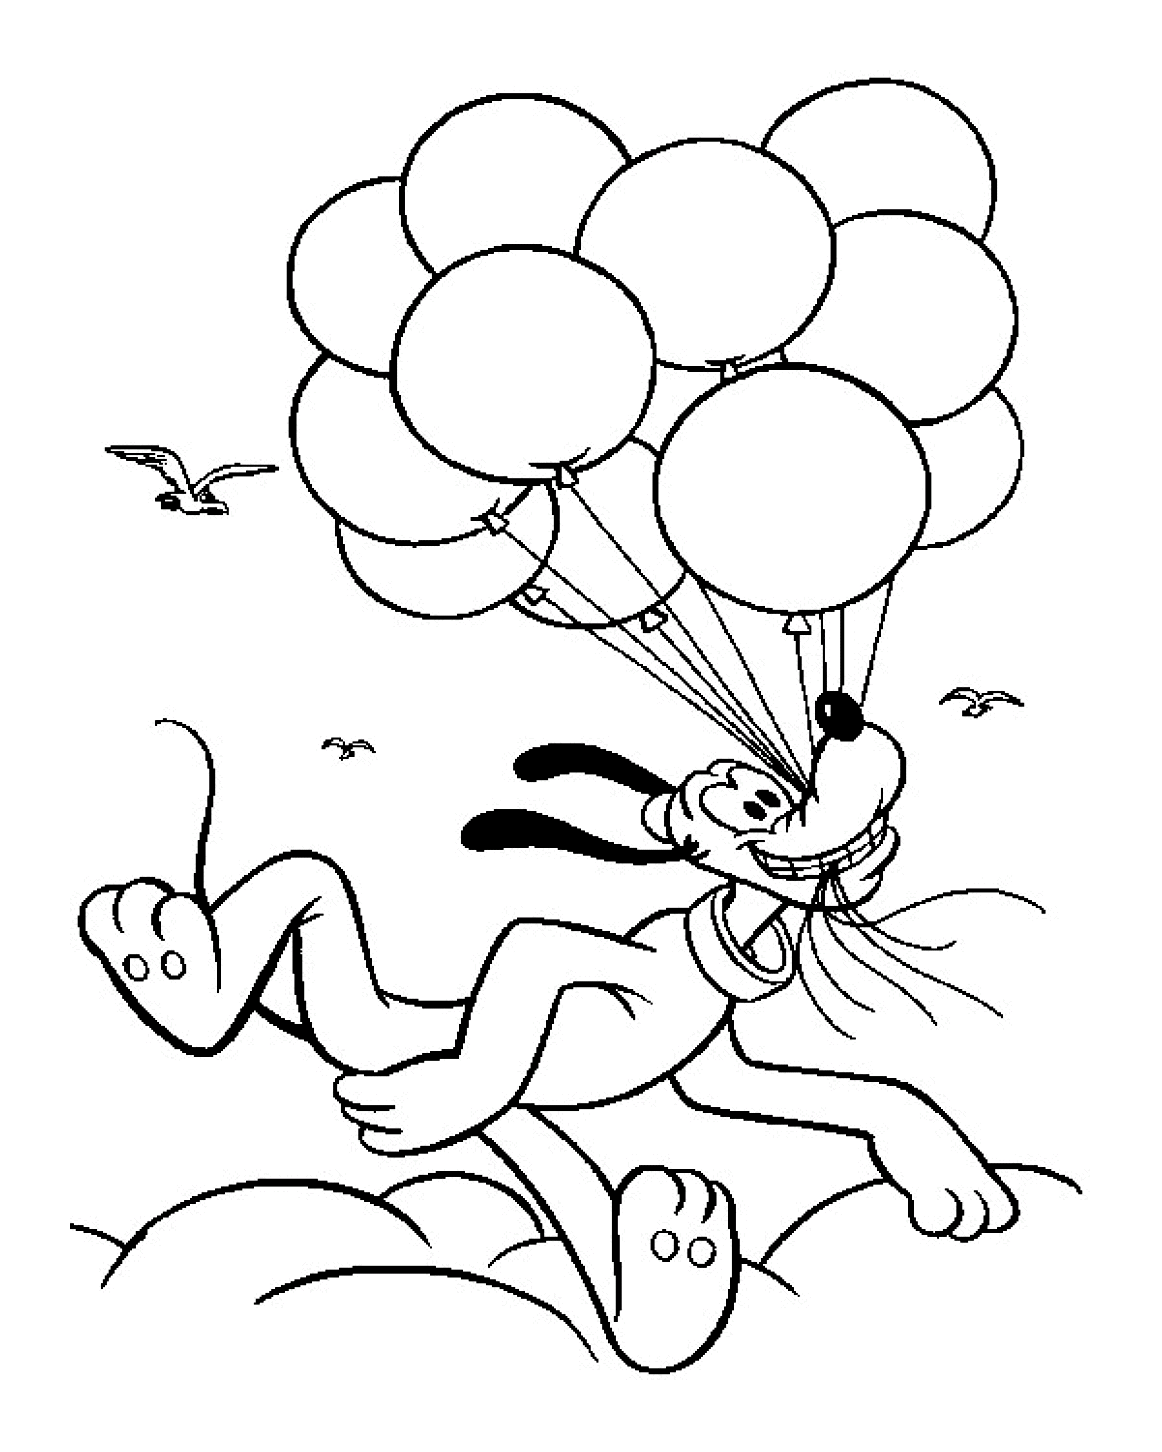 Pluto for children - Pluto Kids Coloring Pages